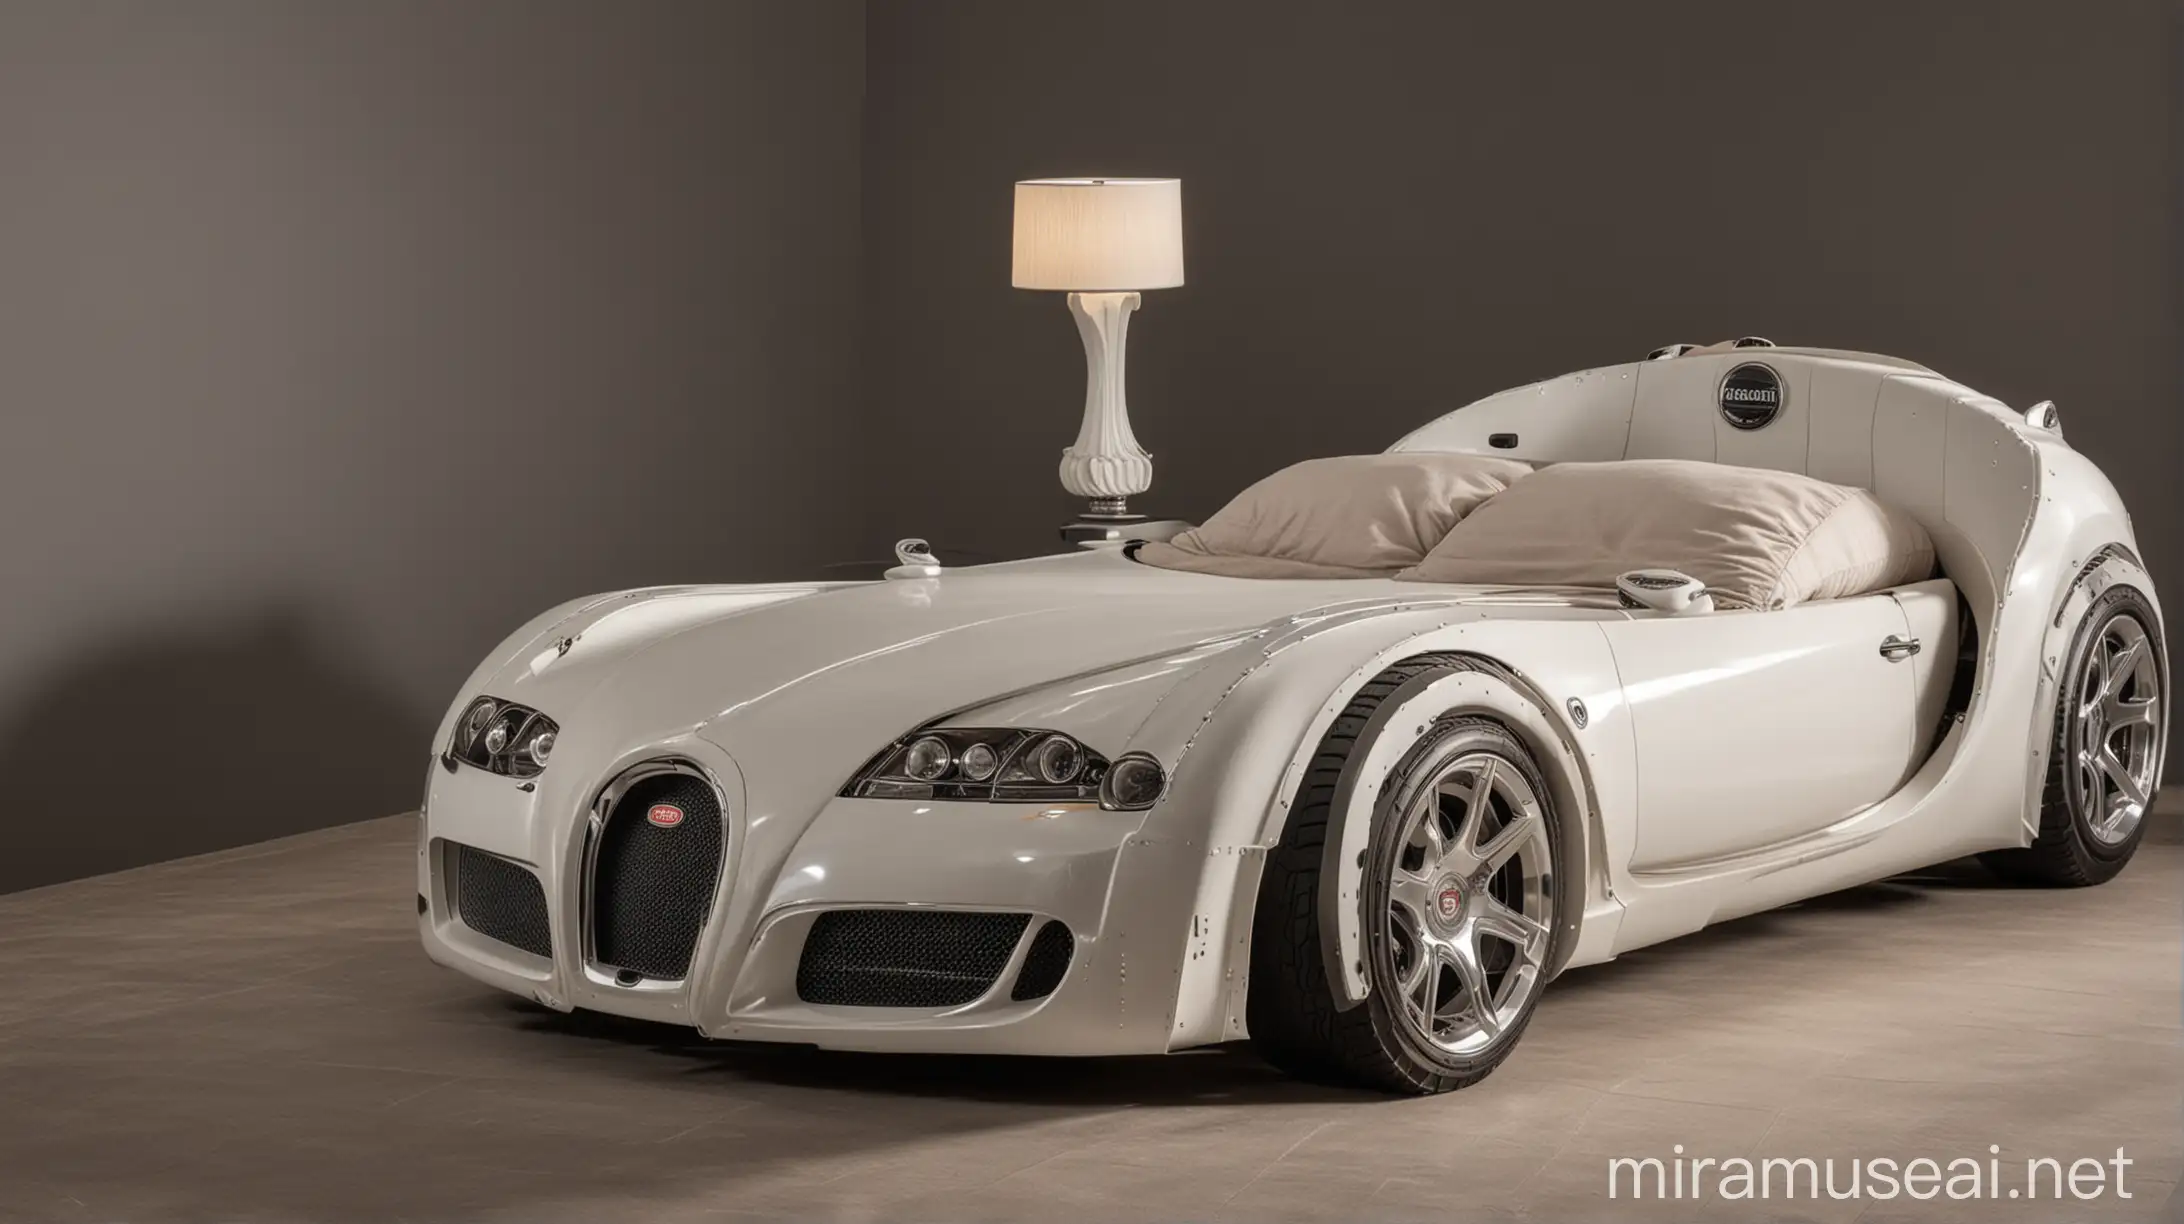 A double bed in the shape of a Bugatti car.